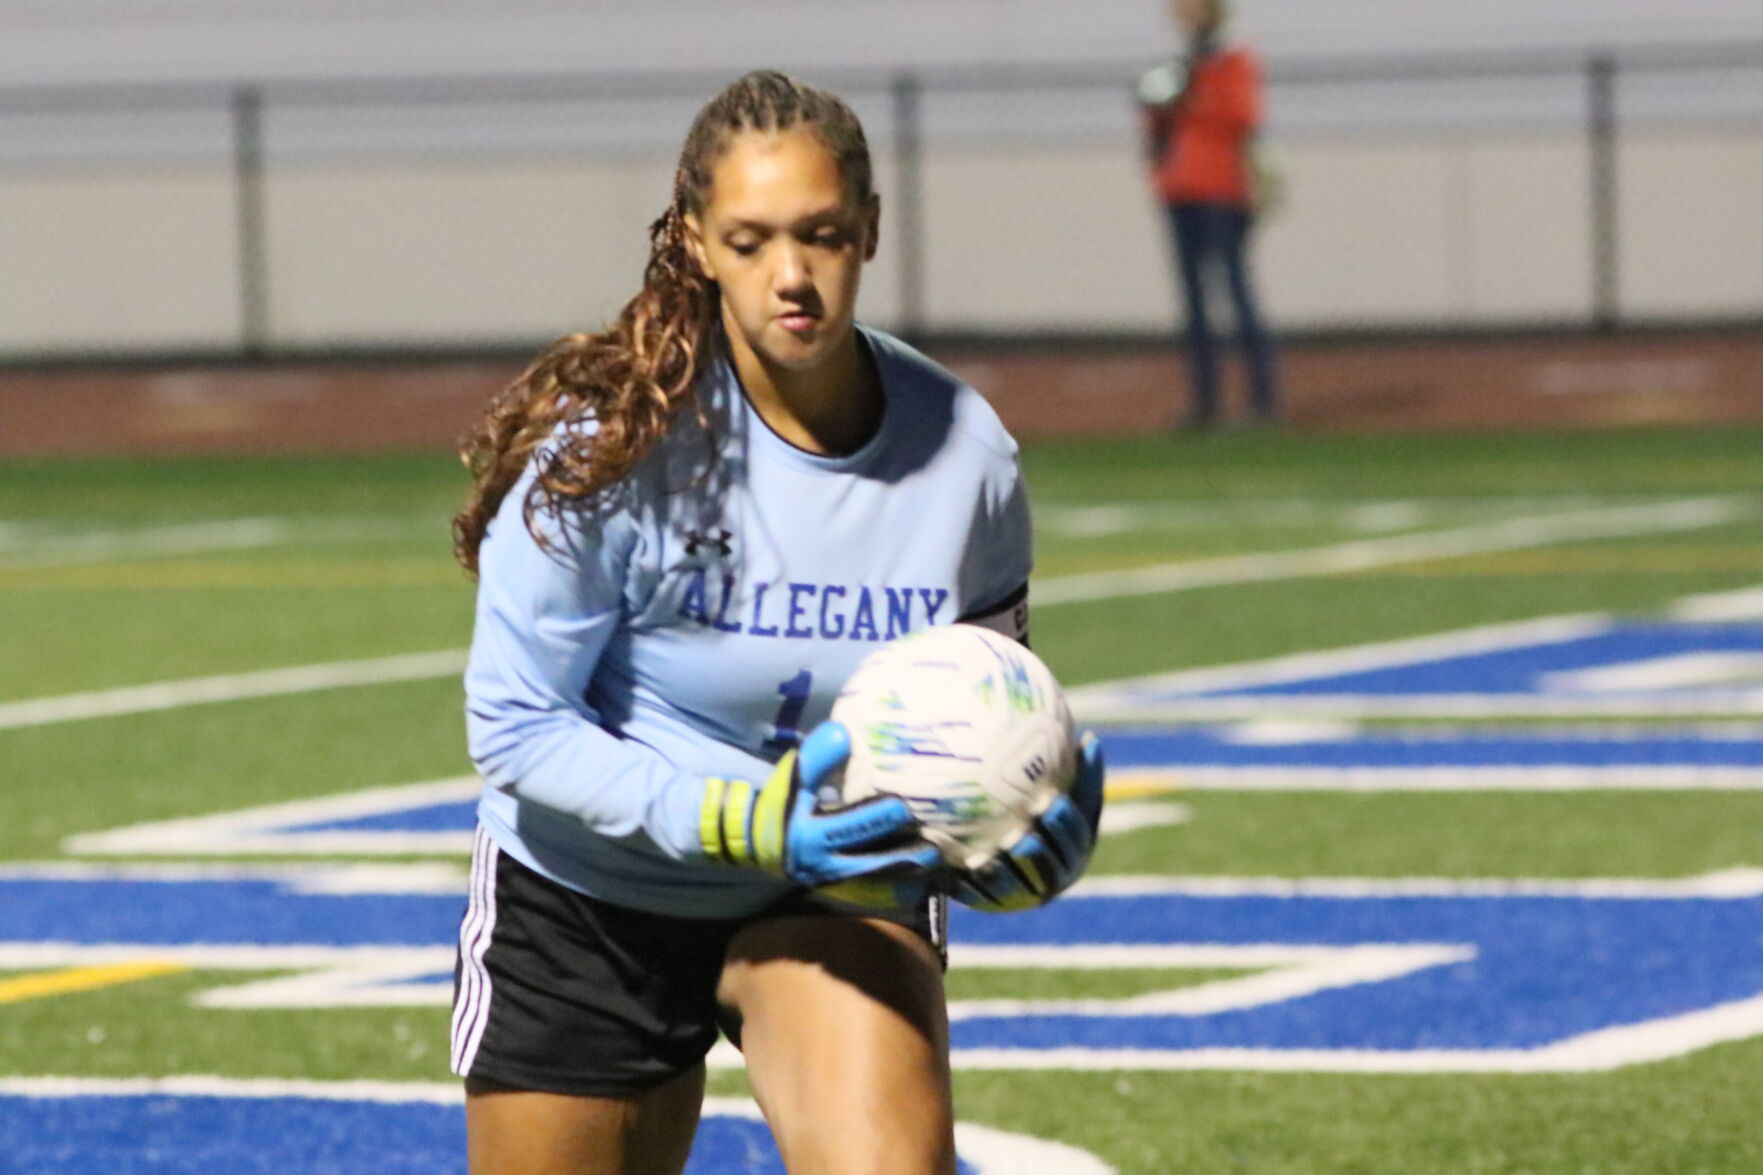 Allegany’s Shylah Taylor Named Girls Soccer Goalkeeper of the Year at Dick Sterne Memorial Dapper Dan Sports Banquet